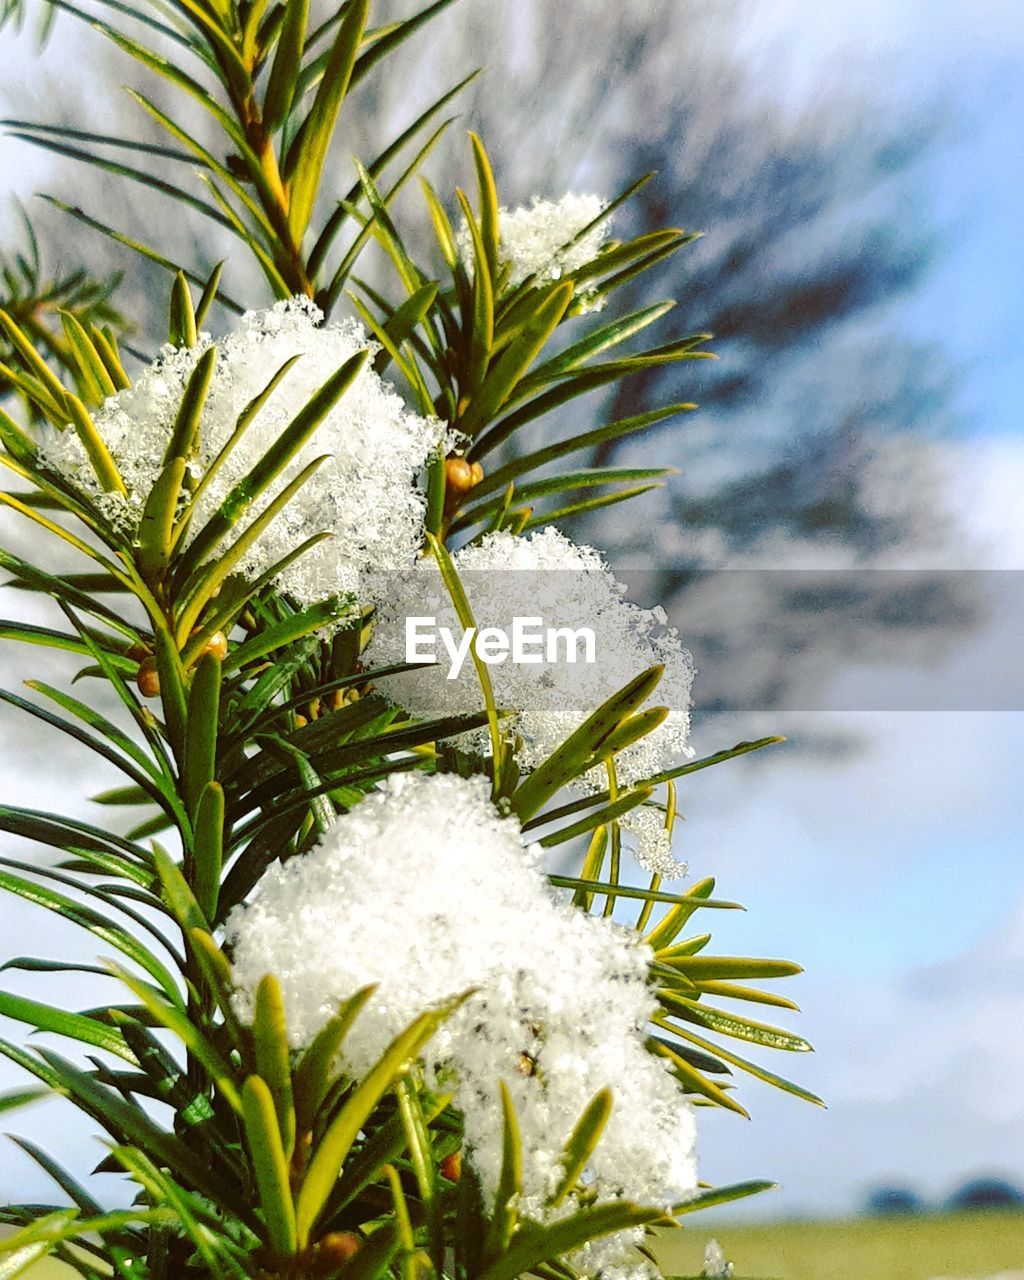 CLOSE-UP OF PINE TREE WITH SNOW